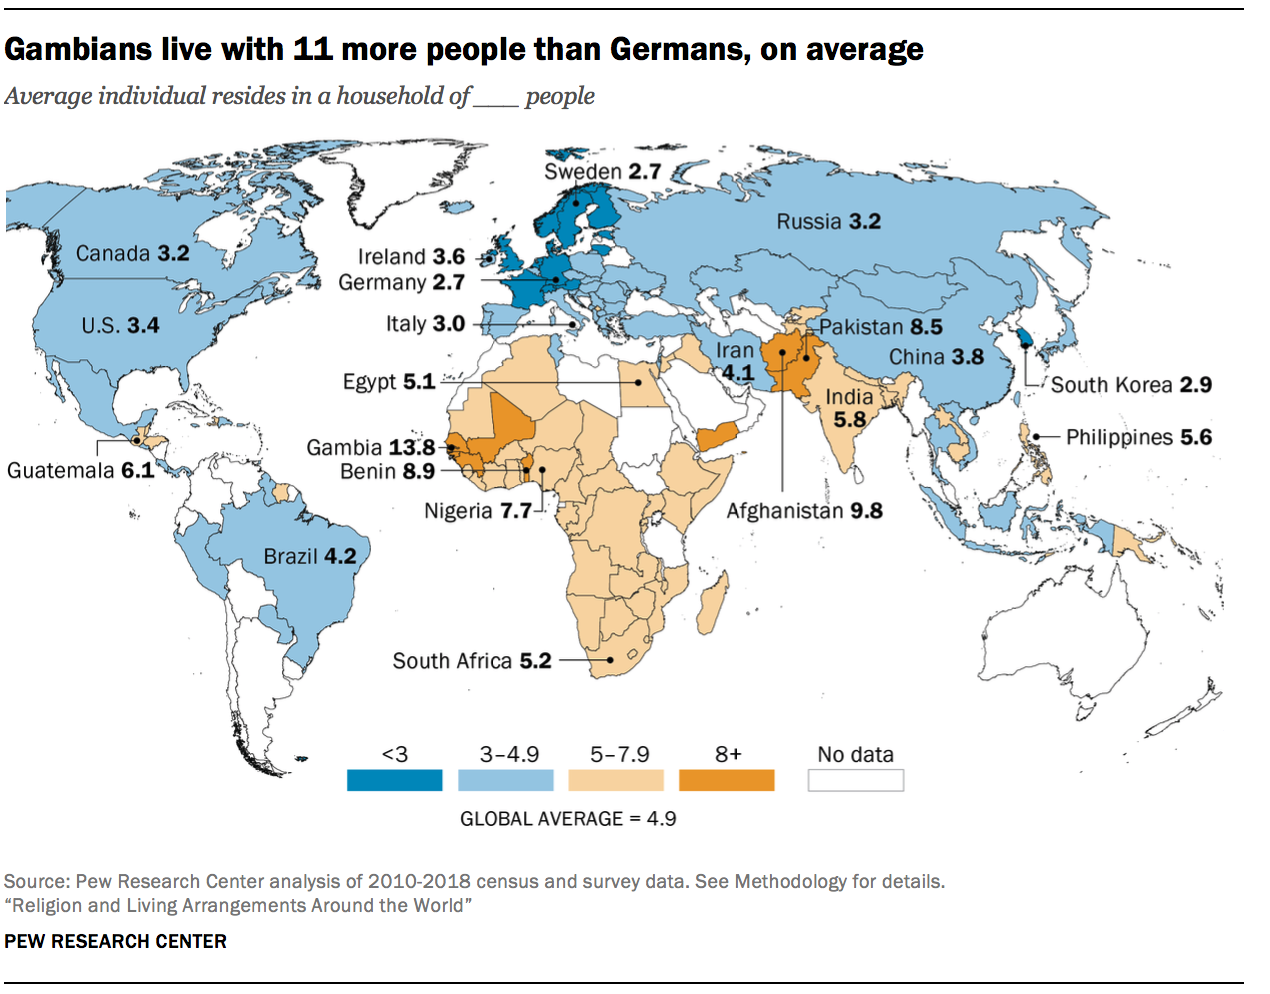 Gambians live with 11 more people than Germans, on average